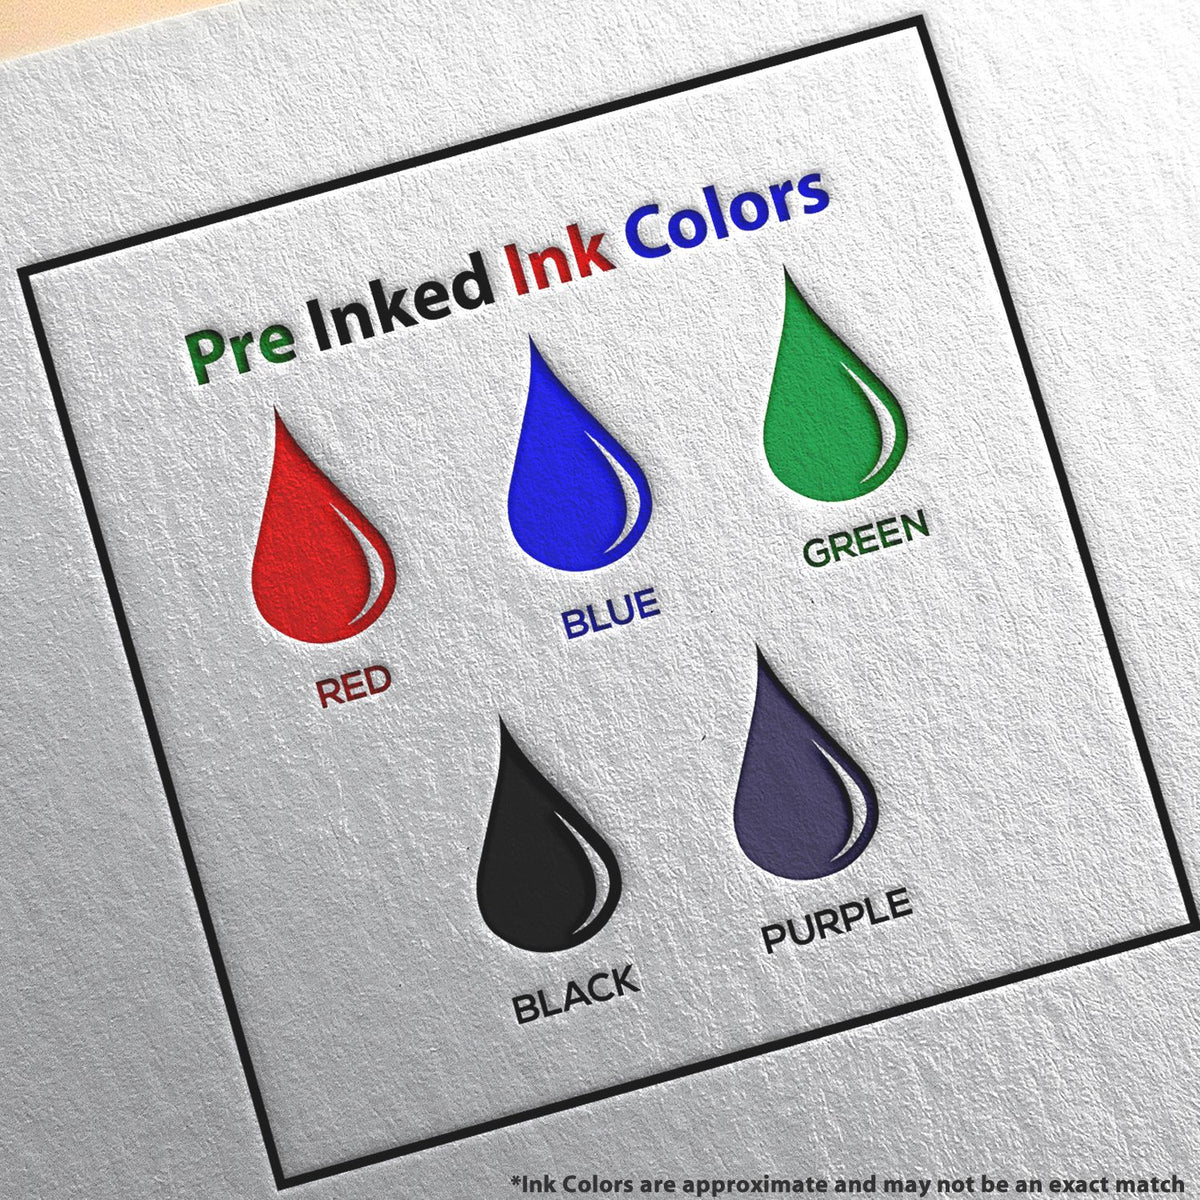 A picture showing the different ink colors or hues available for the Super Slim Wisconsin Notary Public Stamp product.